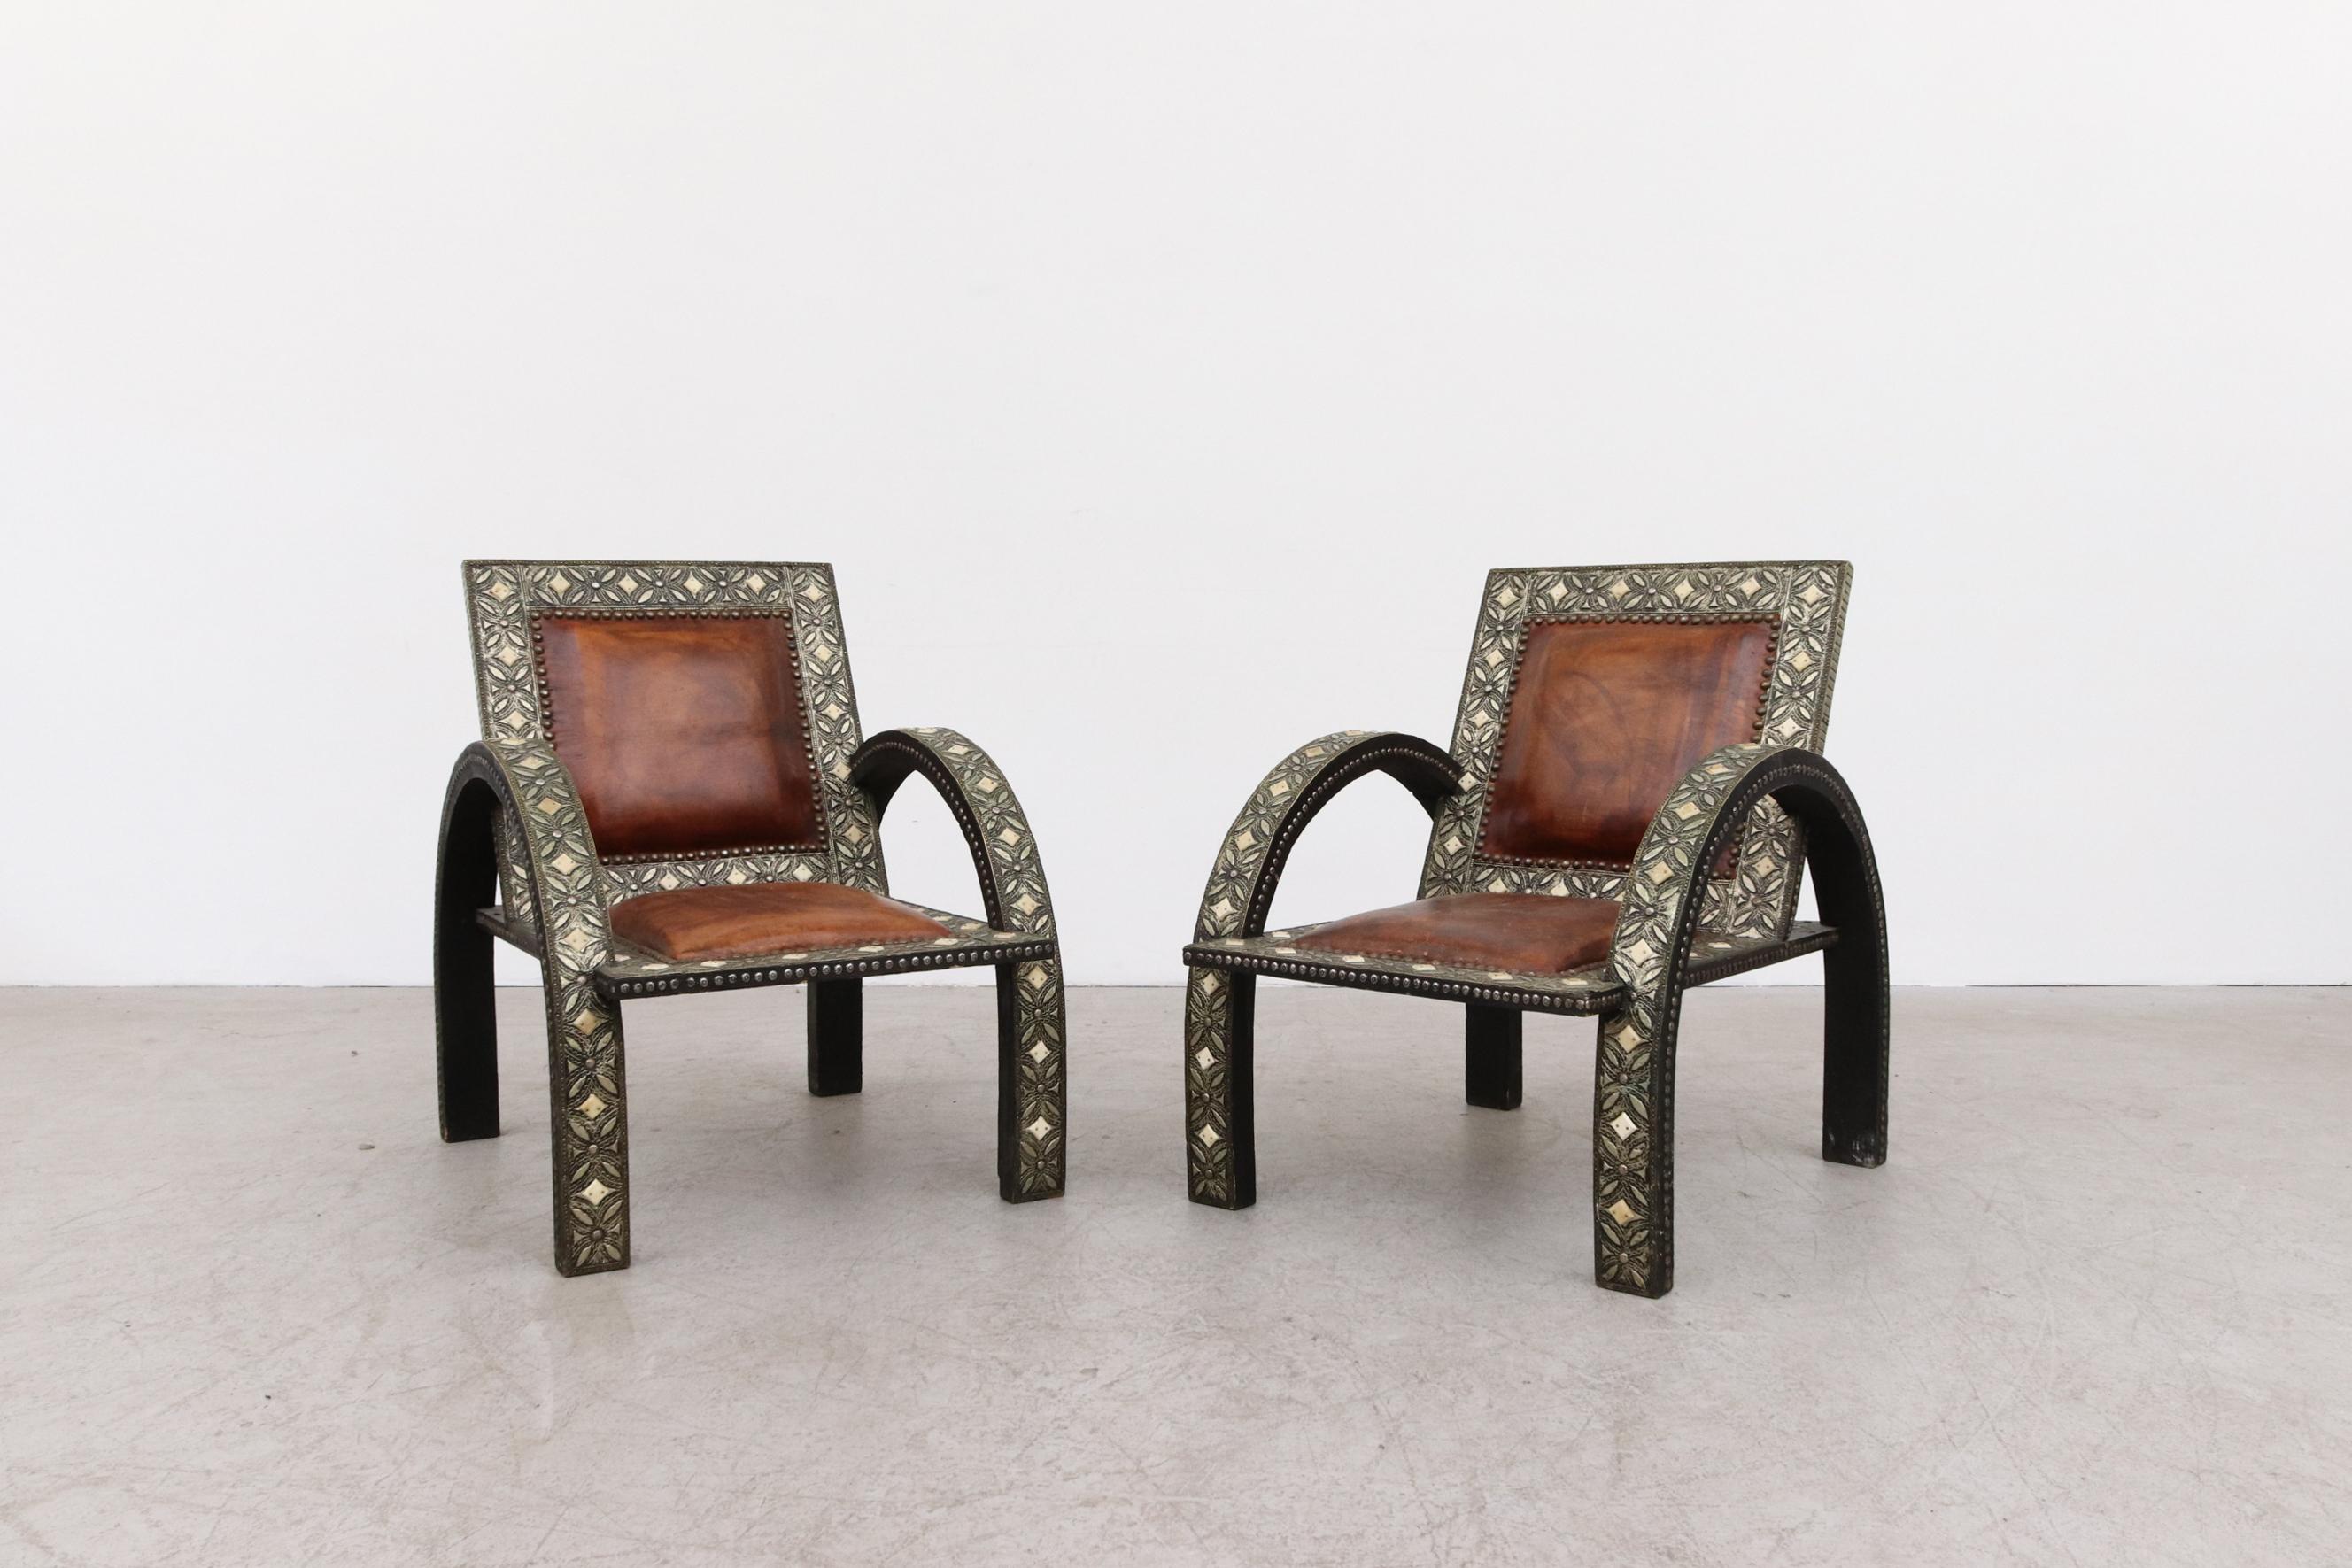 Pair of Moroccan-meets-mid-century lounge chairs with leather seating and decorative frames. 
A unique piece of home decor. Seat depth is 19.5'. In original condition with wear consistent with their age and use. Set Price.